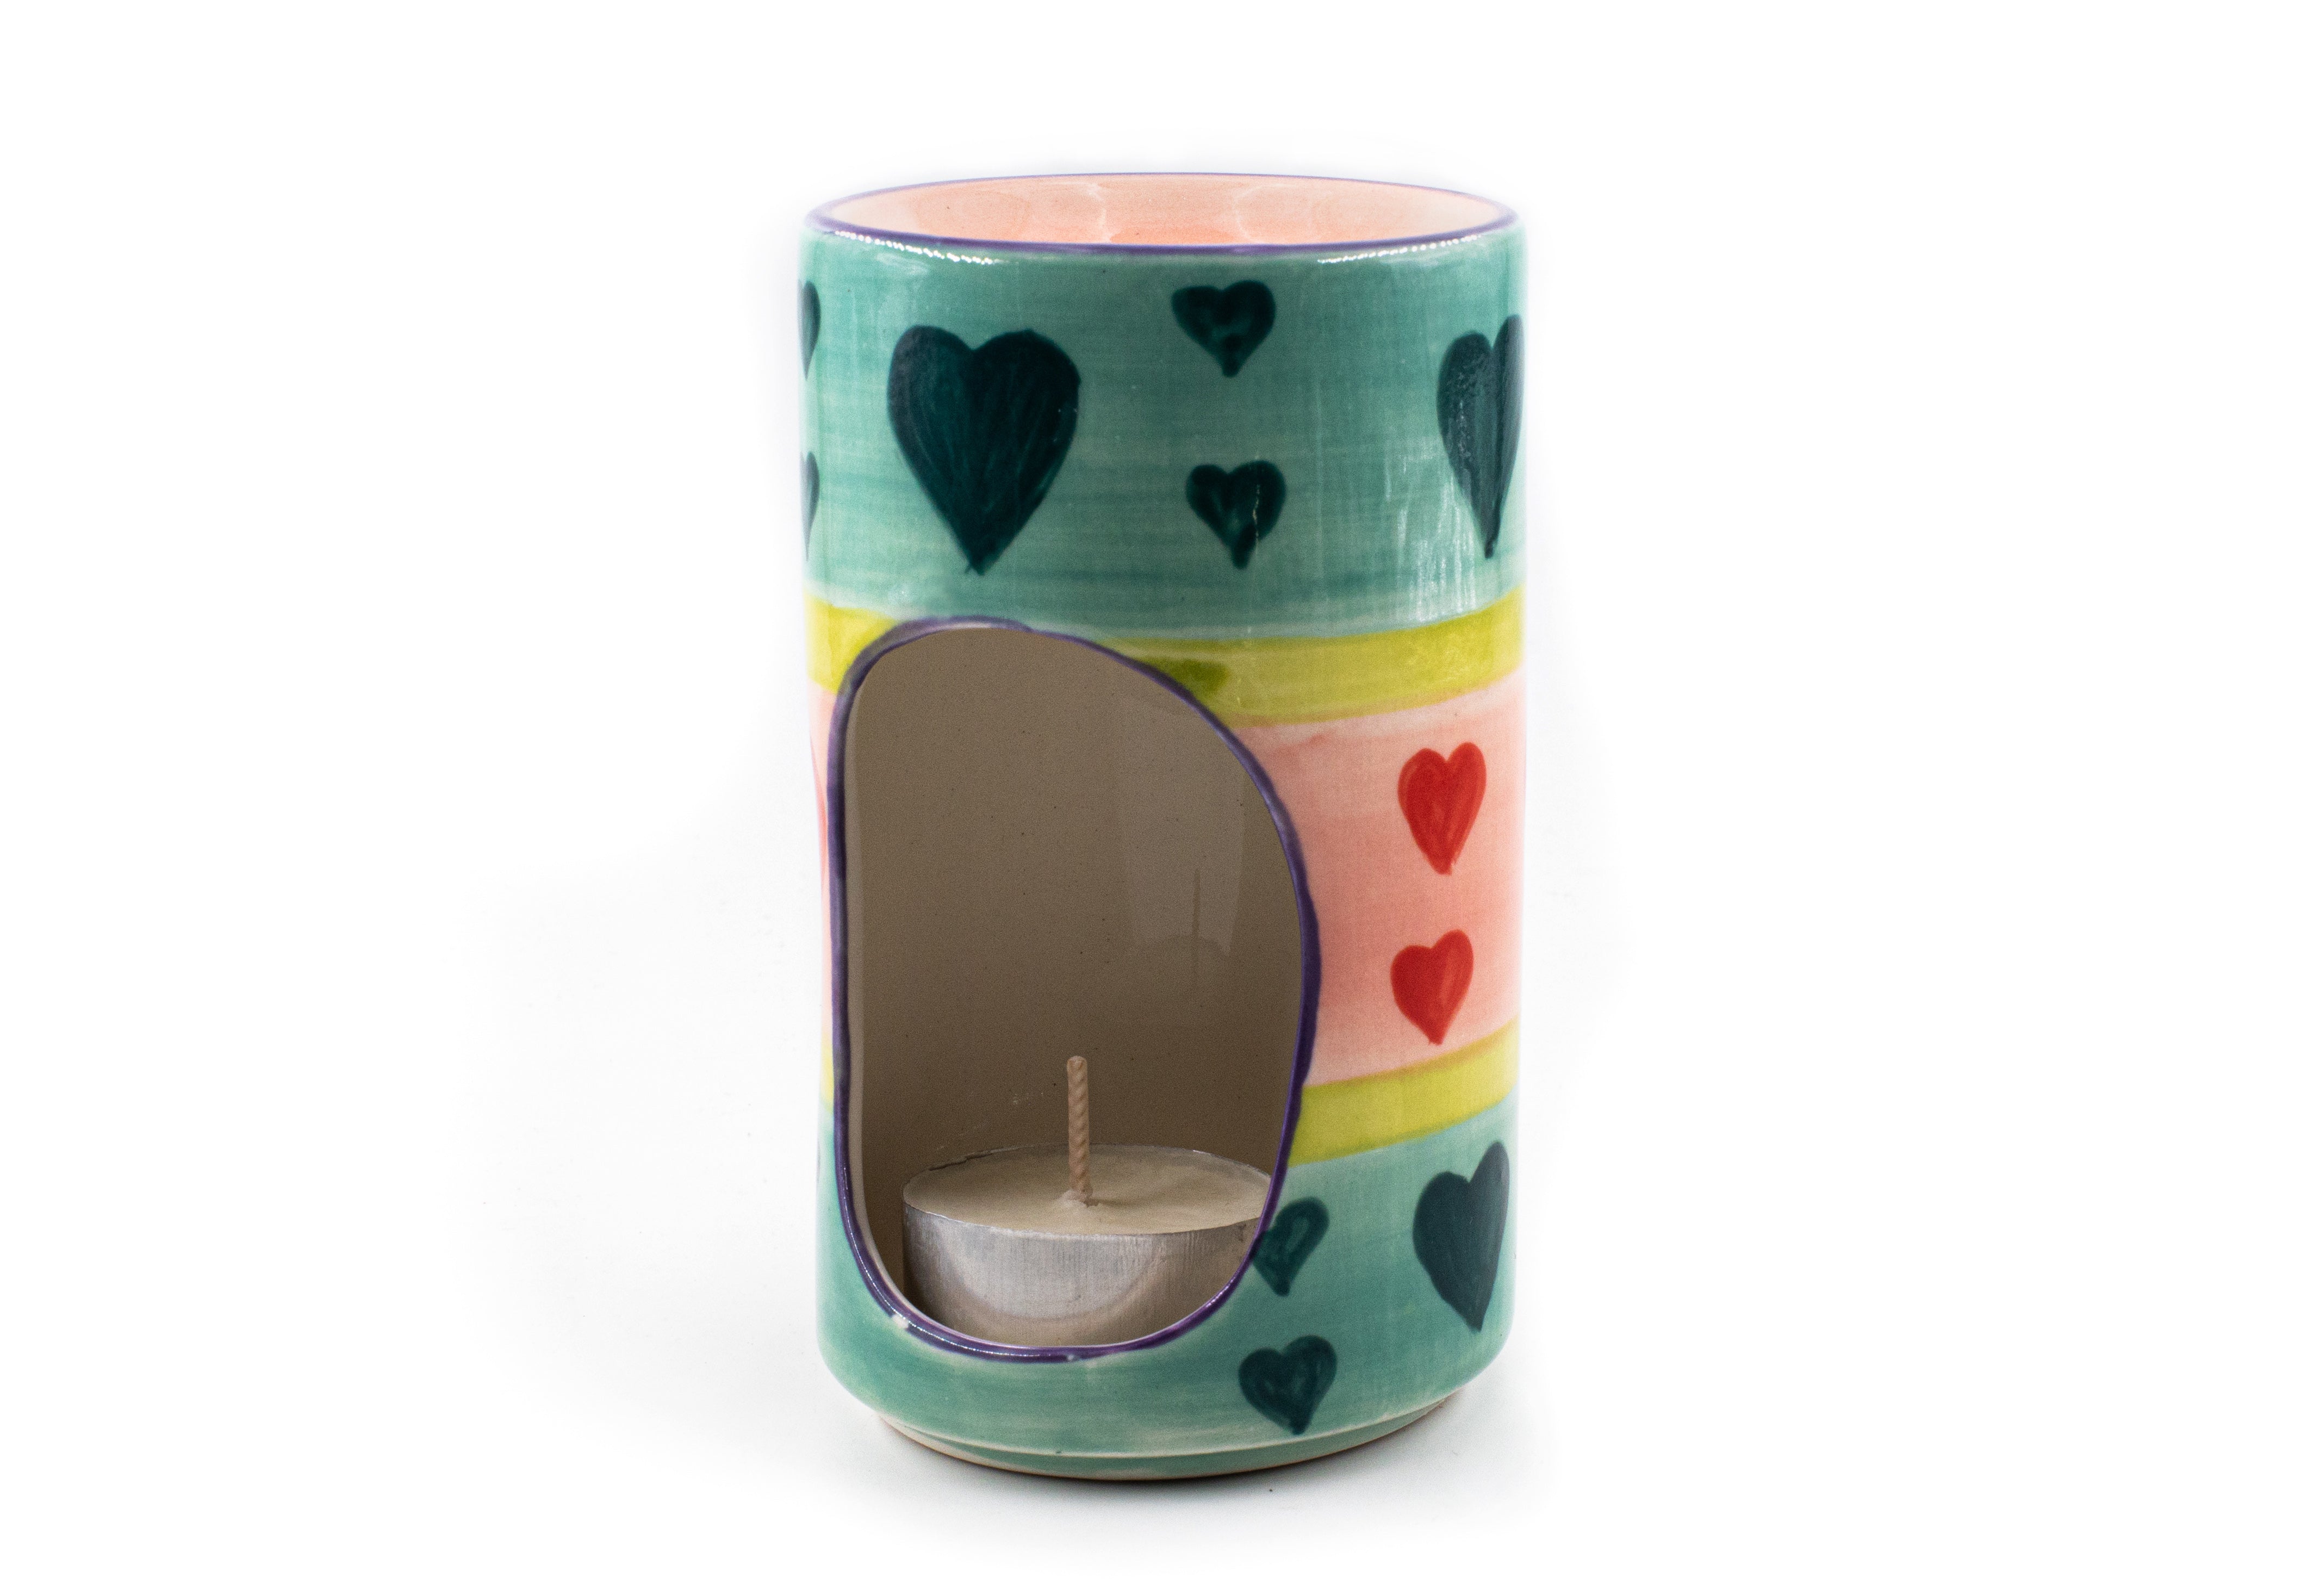 Pastel colors with hearts, this is a Pastel Hearts hand made and hand painted ceramic scent candle burner.